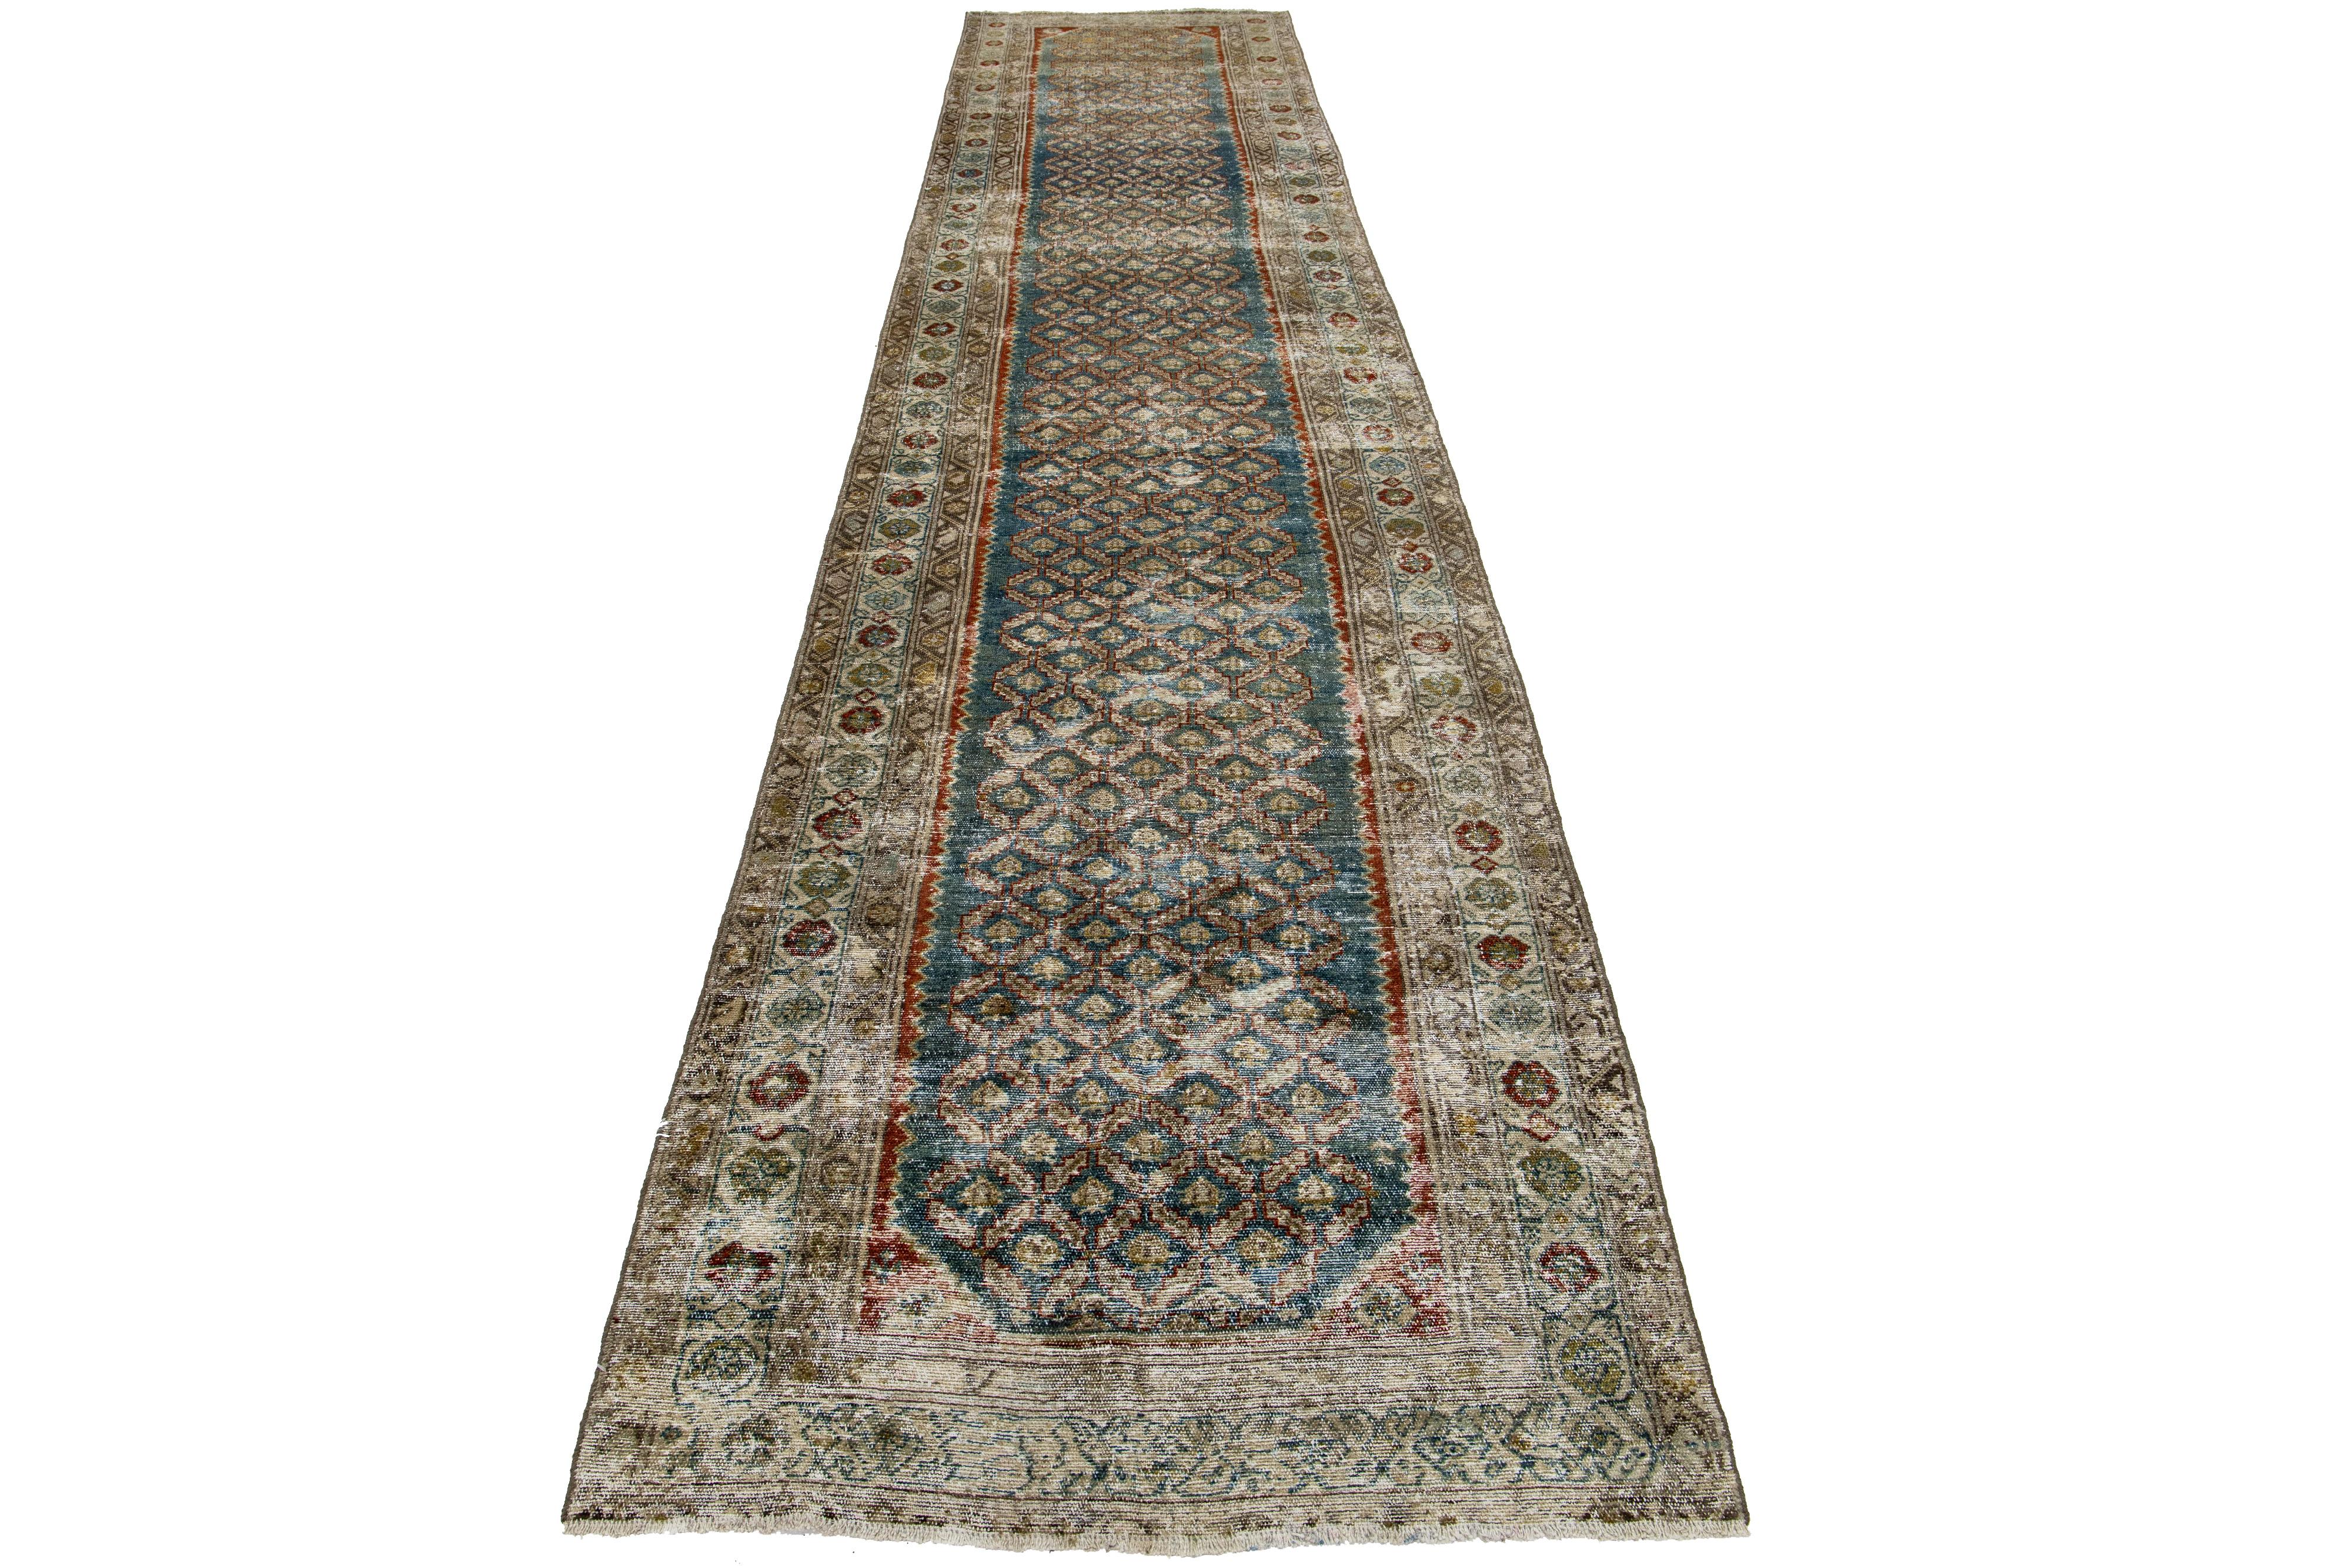 This Persian Malayer wool rug possesses an antique allure. It showcases hand-knotted wool in a blue color field. The trellis pattern is embellished with rust, brown, and golden accents.

This rug measures 3'4